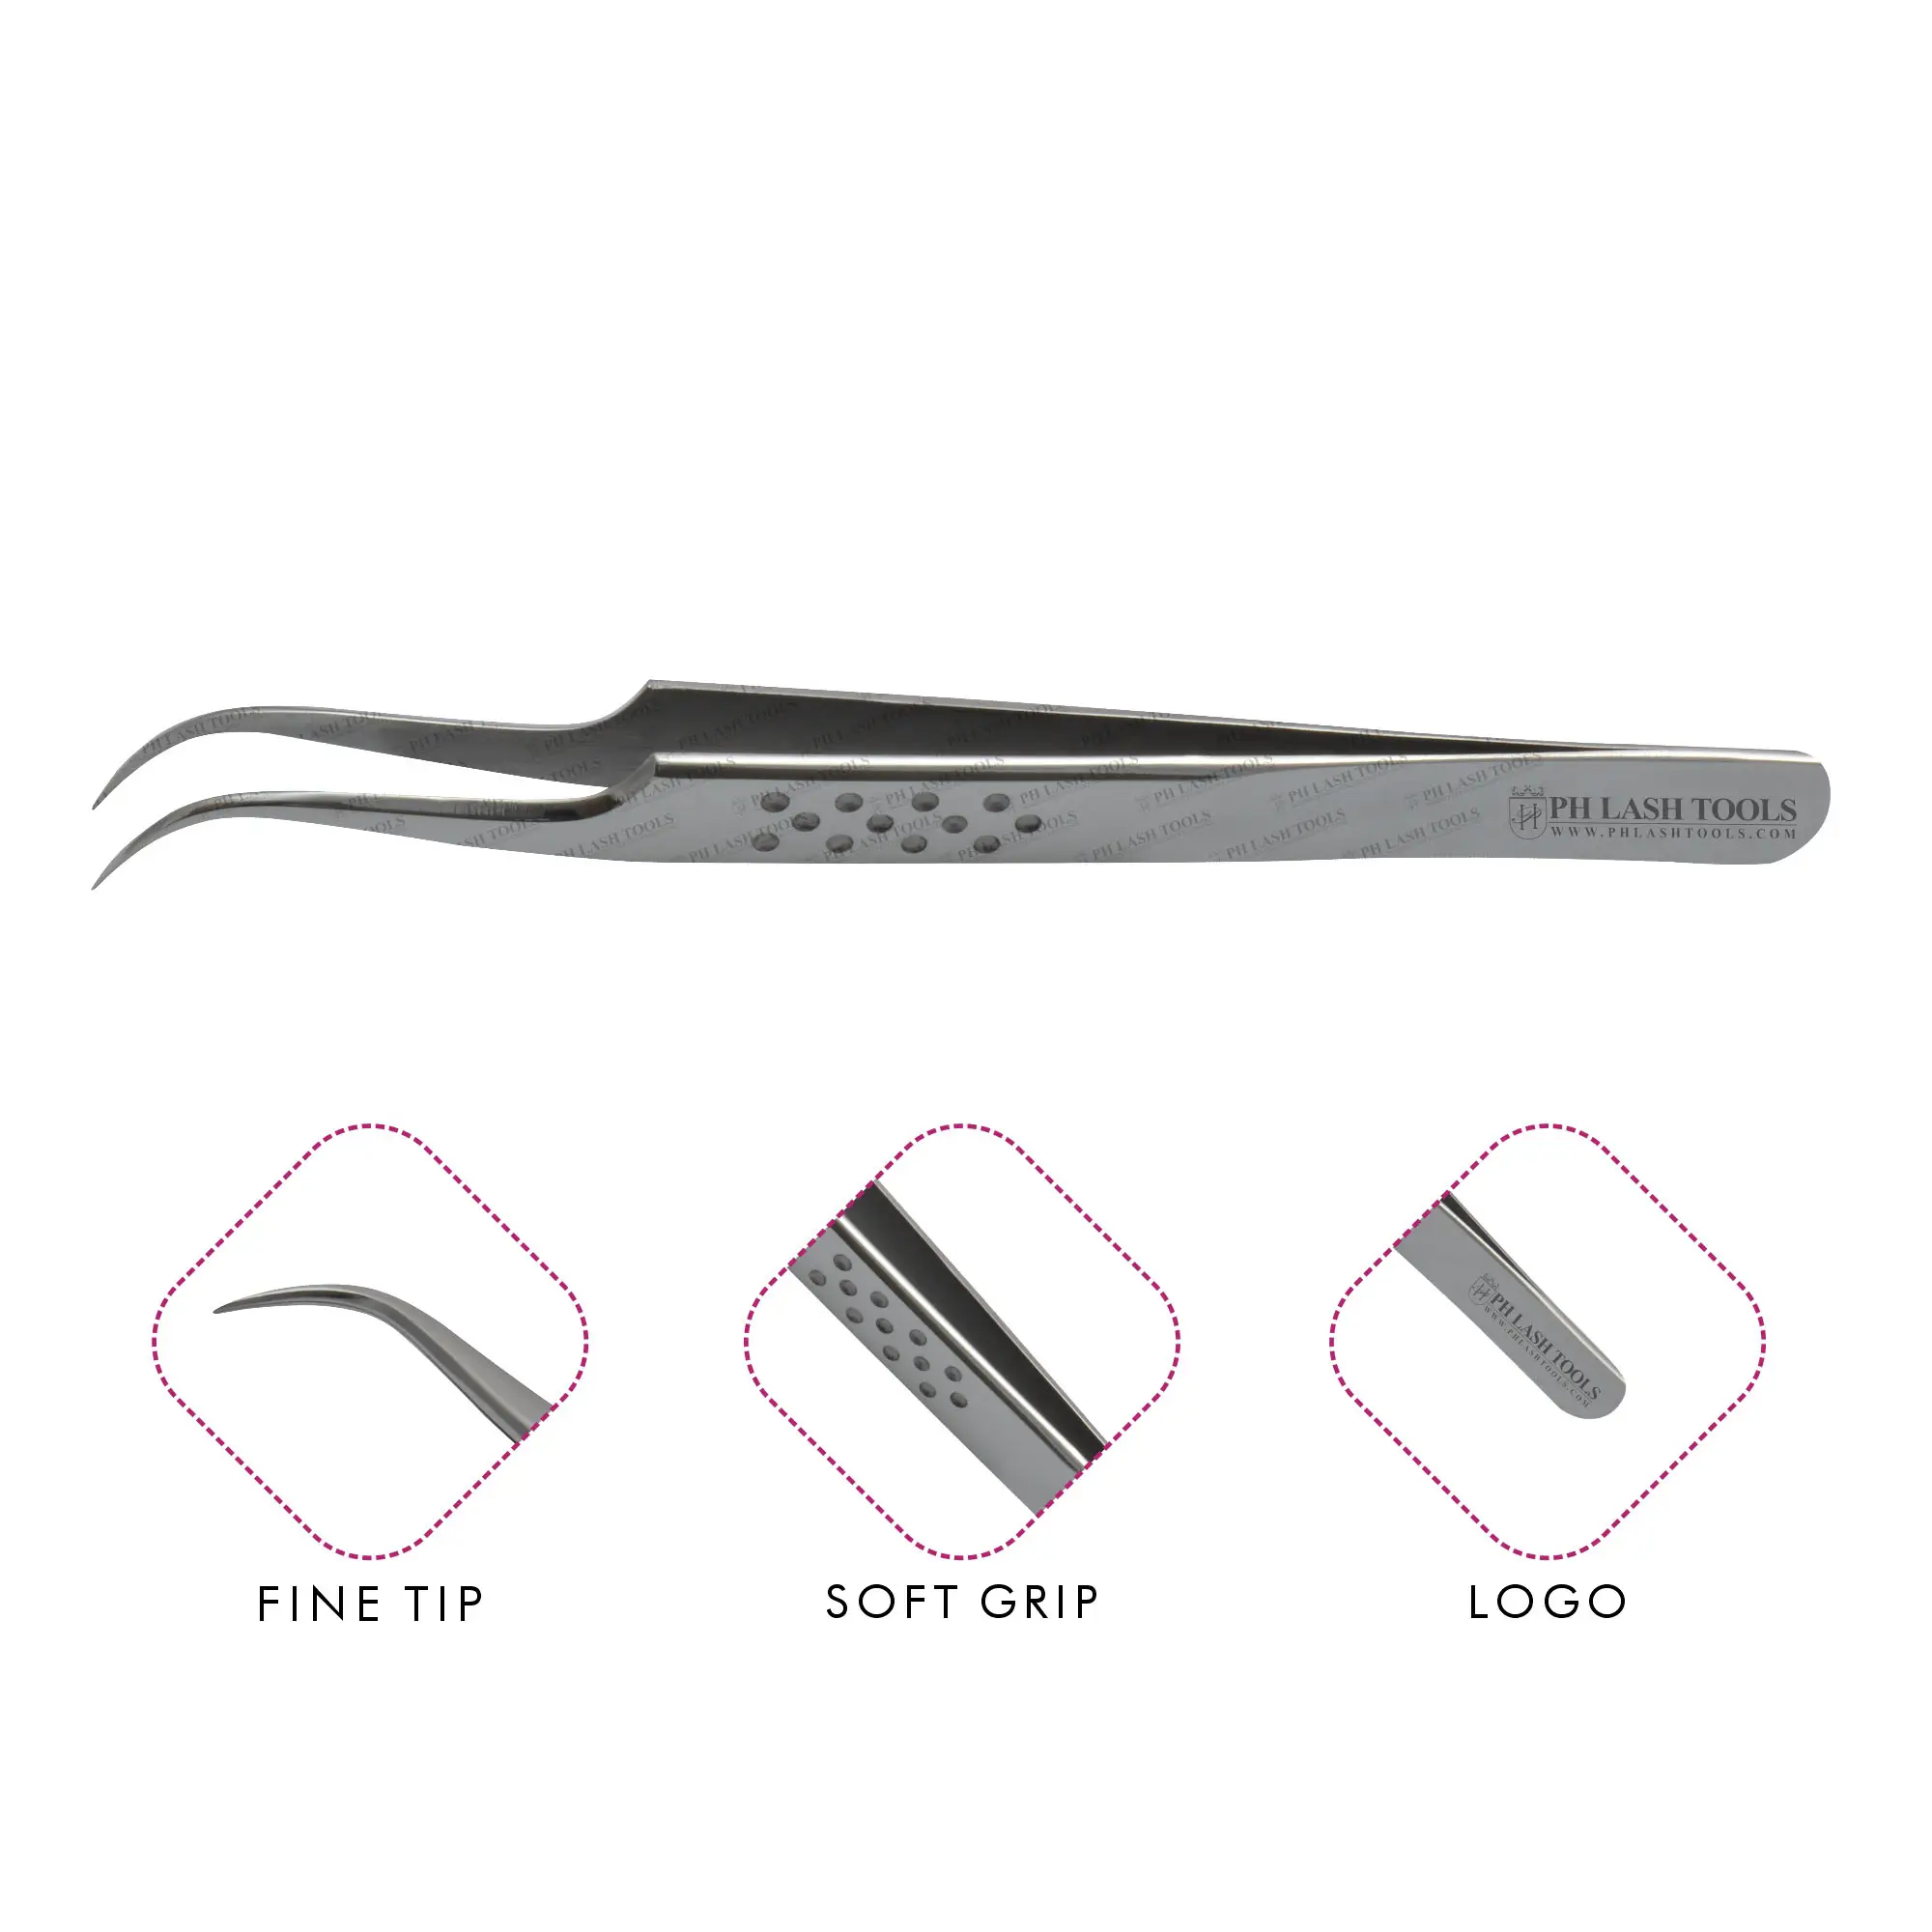 Mirror Polish Fine Tip Eyelash Extension Tweezers with Dotted Design Private Label, Light Curved Eyelash Extension Tweezer